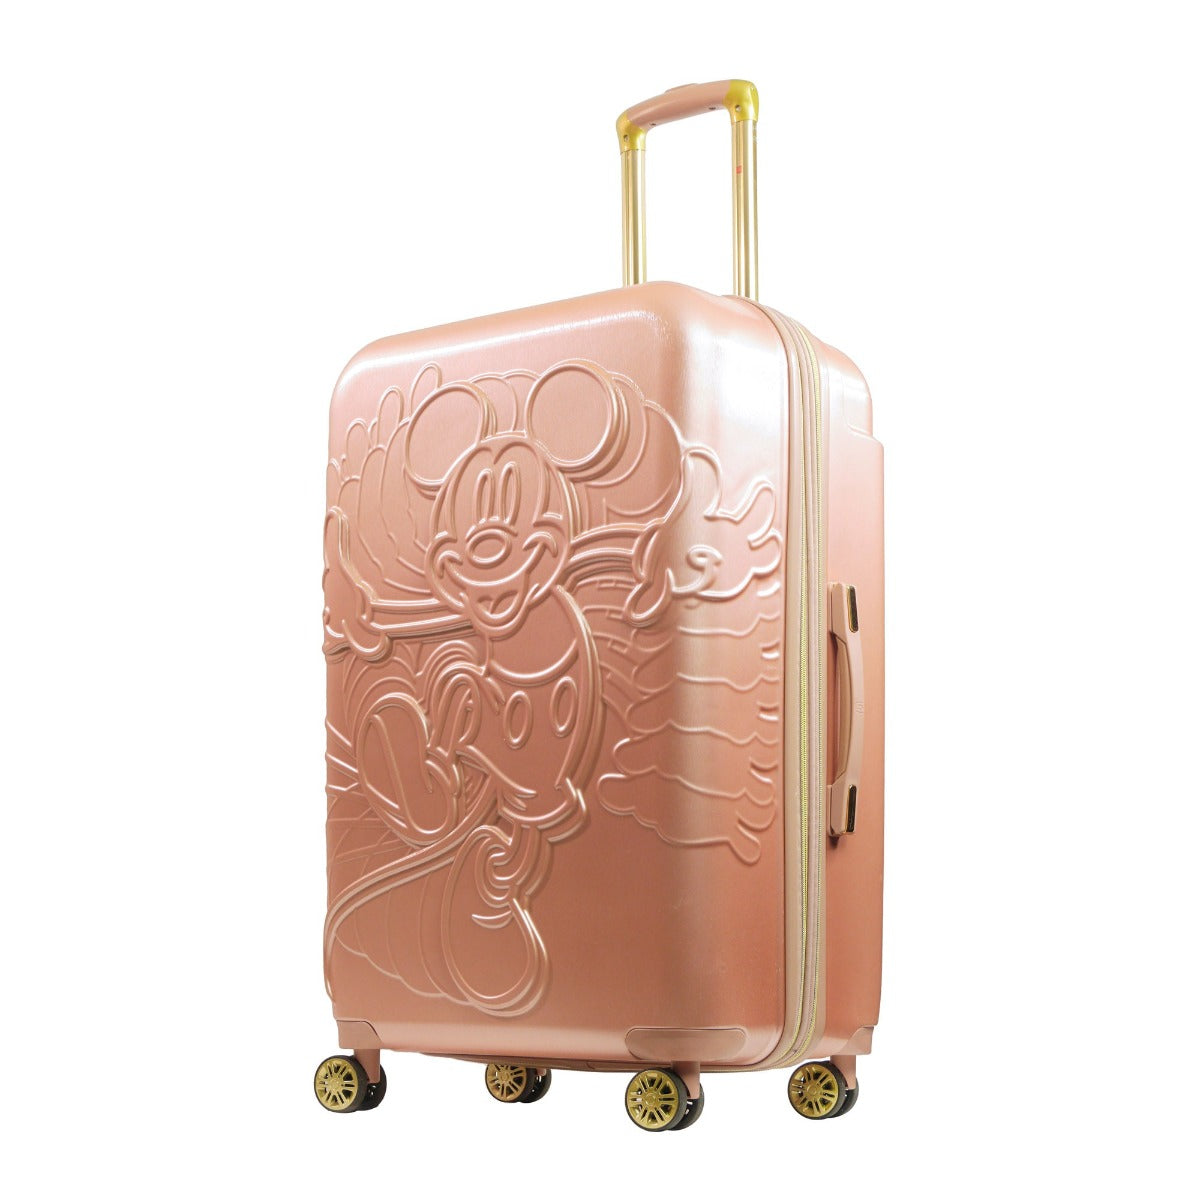 Disney Running Mickey 30.5" Spinner Luggage Rose Gold expandable 2 inch gusset checked suitcase hardsided spinner